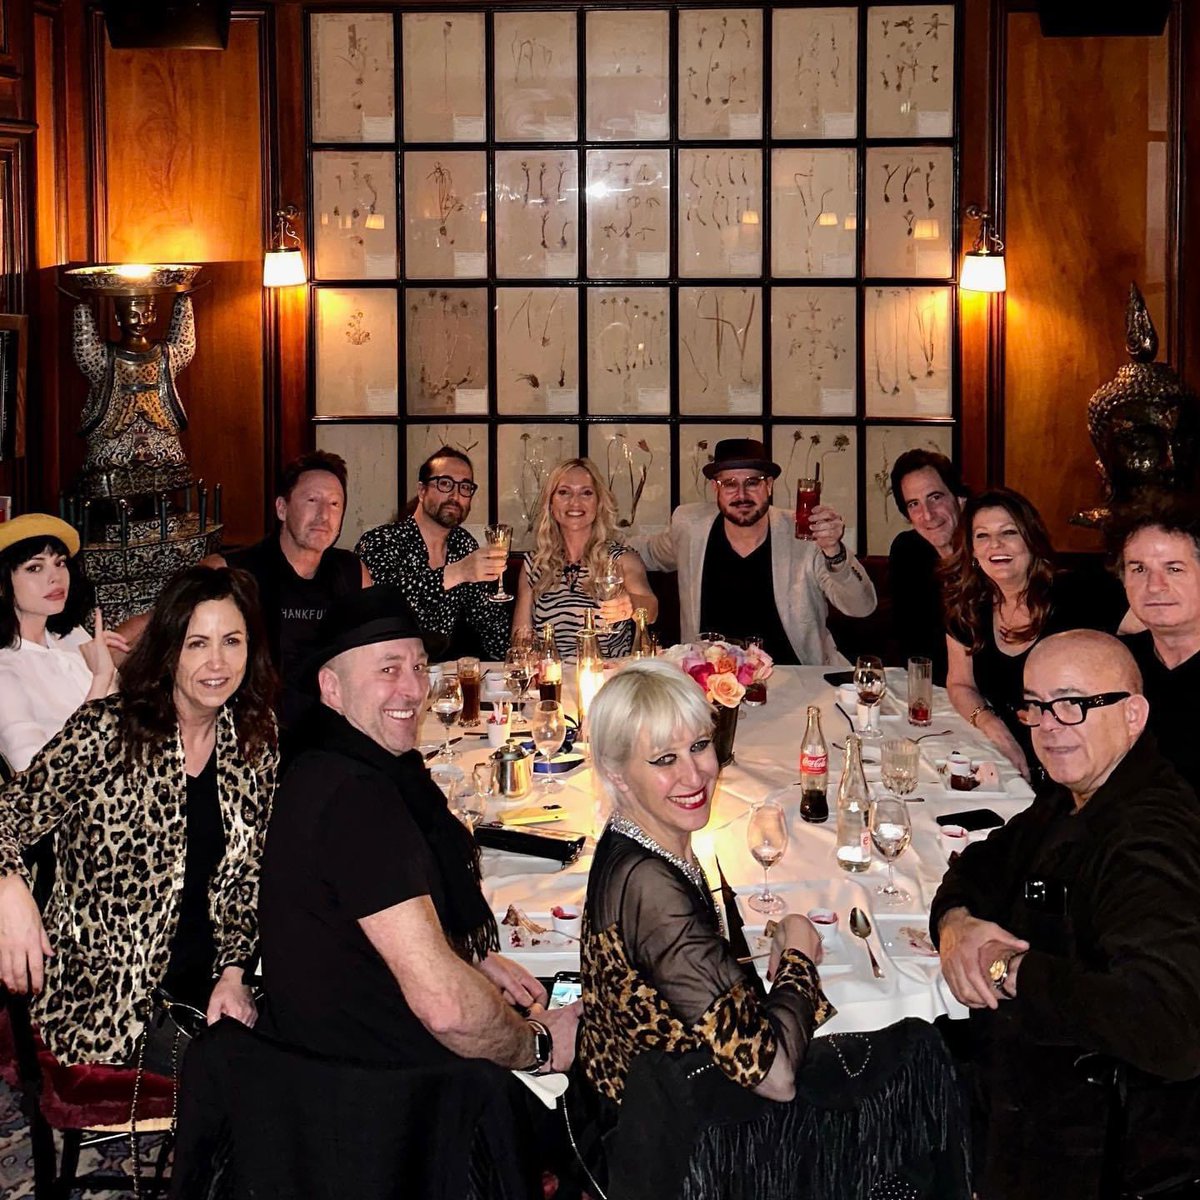 Thank you to BMG for Hosting this lovely Birdy dinner, with some of My nearest & dearest… And Especially to the guy sitting to my left… Having you there made my night & day… ❤️🙏🏻😘 (And last but not least, to Rebecca, who coordinated it all ❤️)